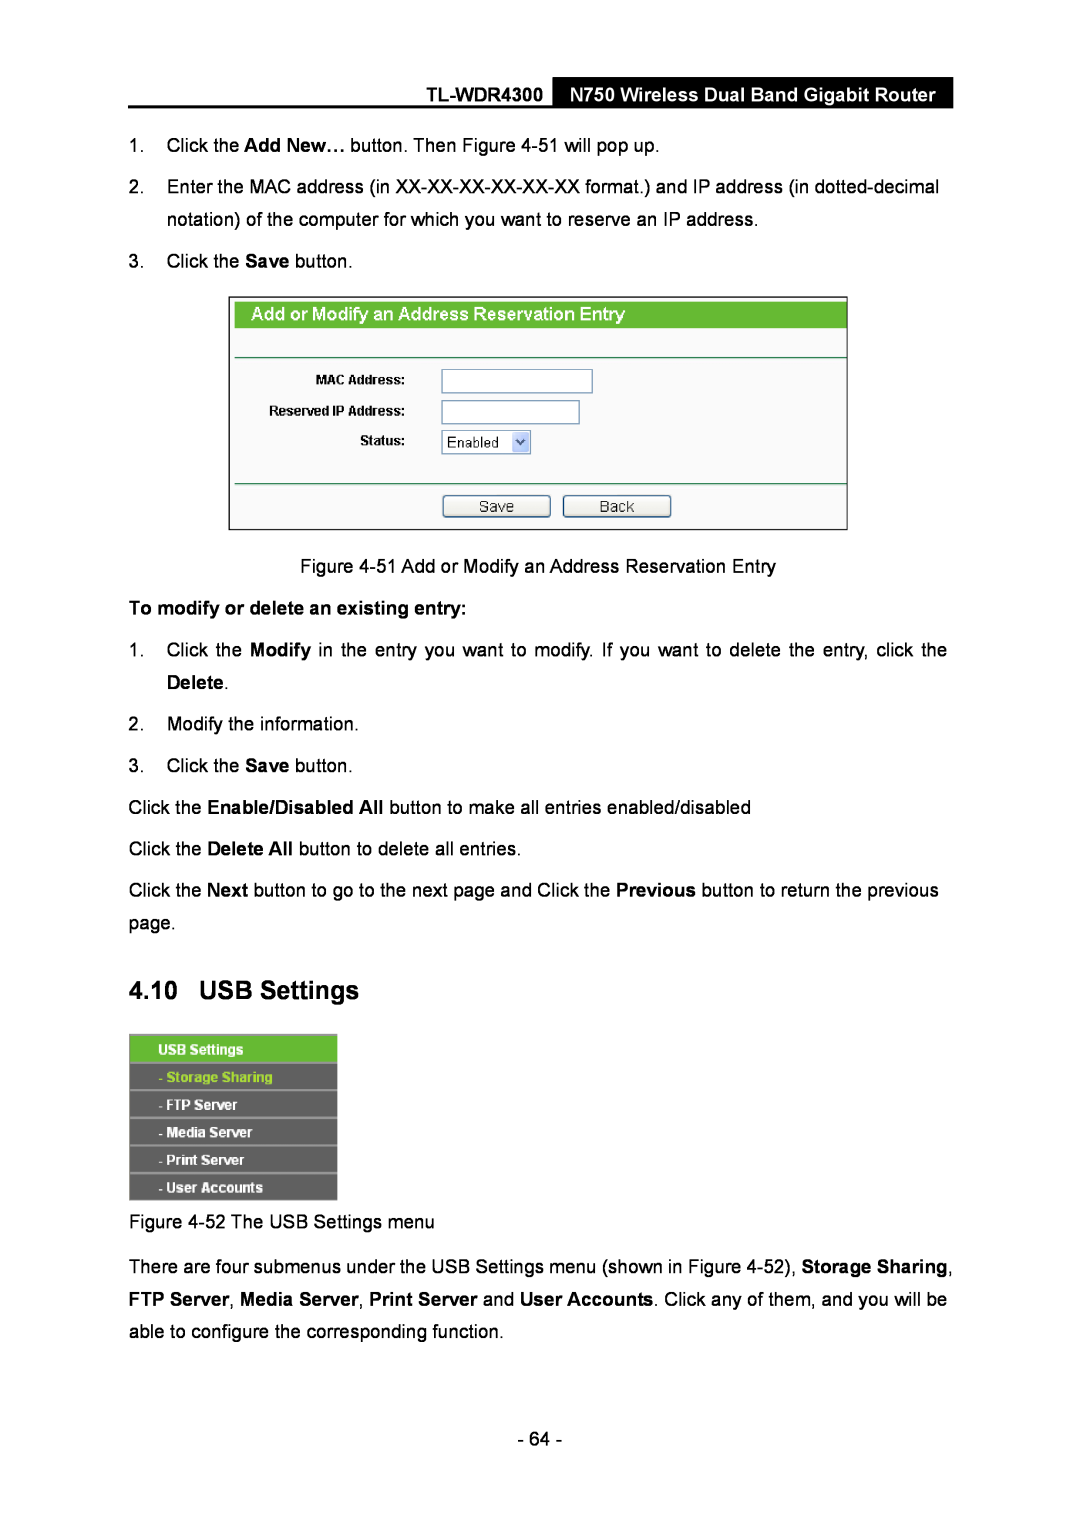 TP-Link manual USB Settings, TL-WDR4300 N750 Wireless Dual Band Gigabit Router, To modify or delete an existing entry 